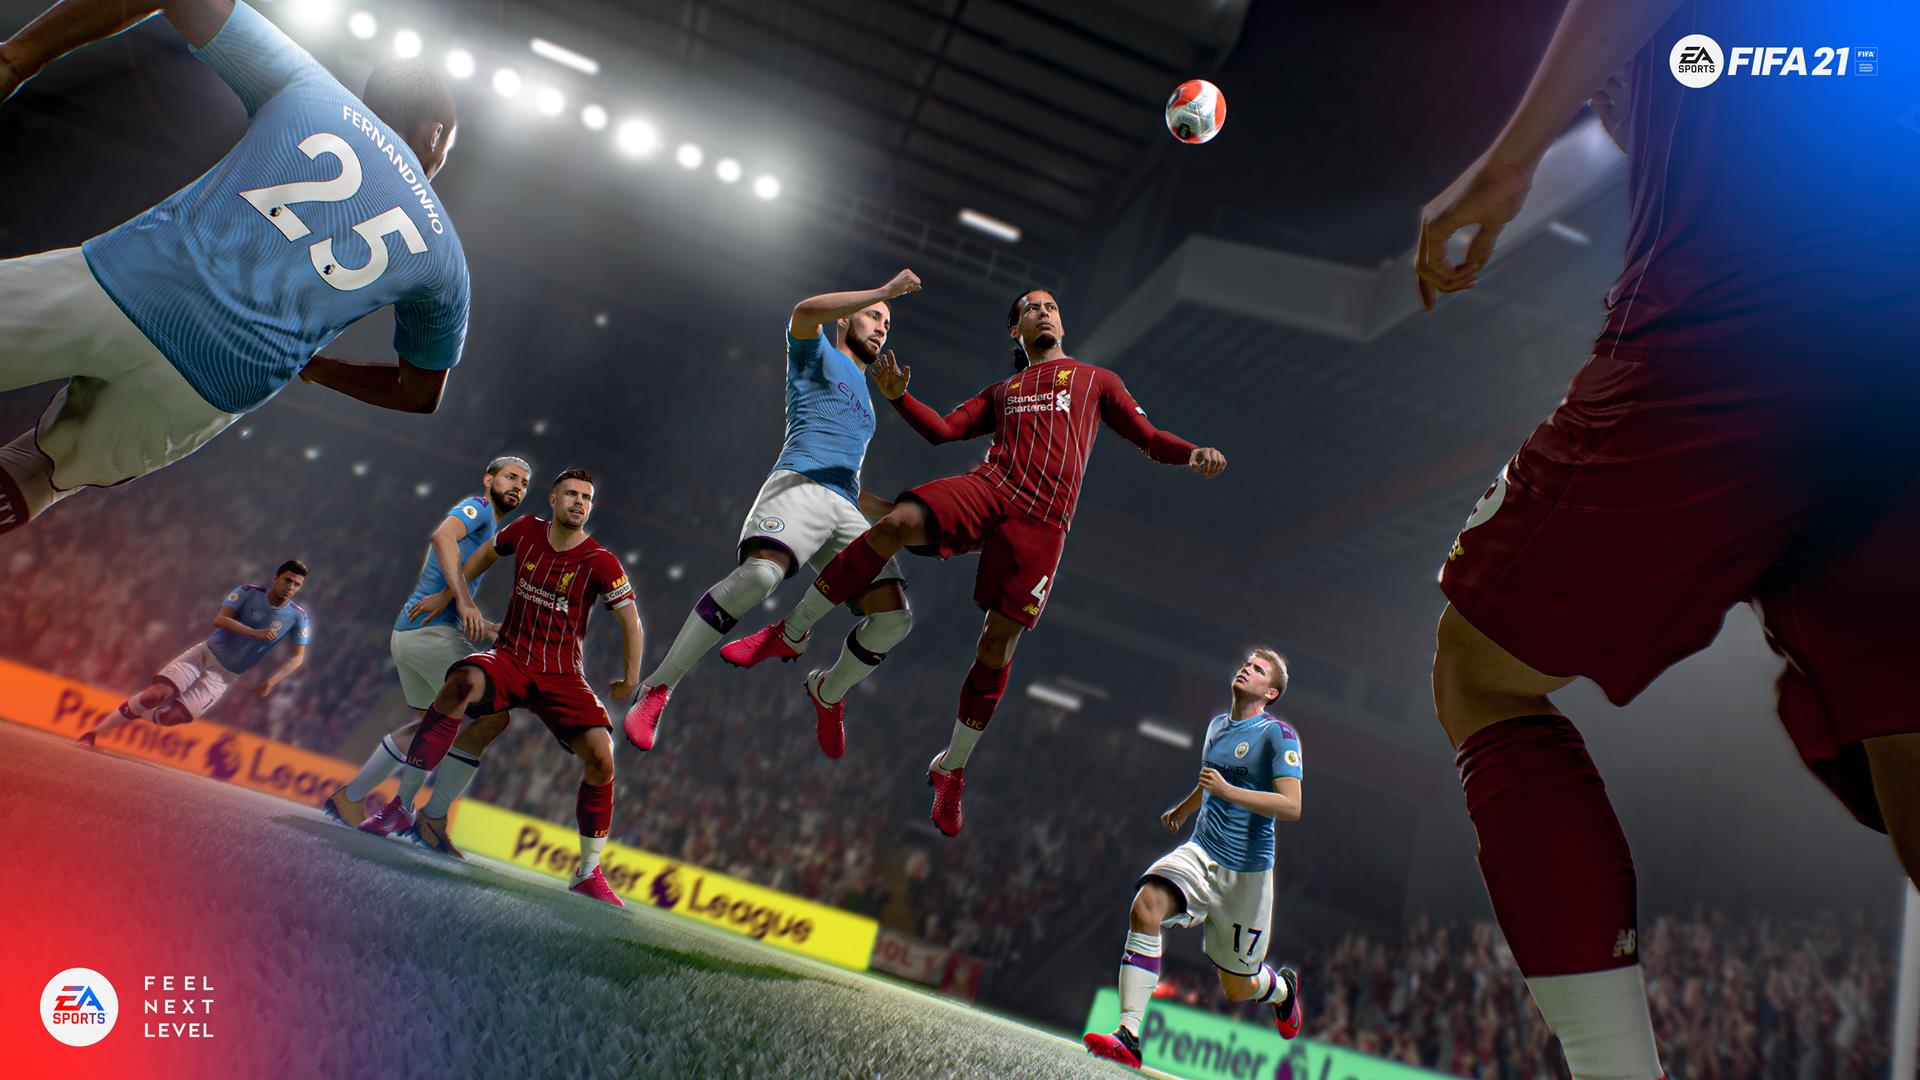 Image for FIFA 21 is on sale as part of Amazon Prime Day 2020